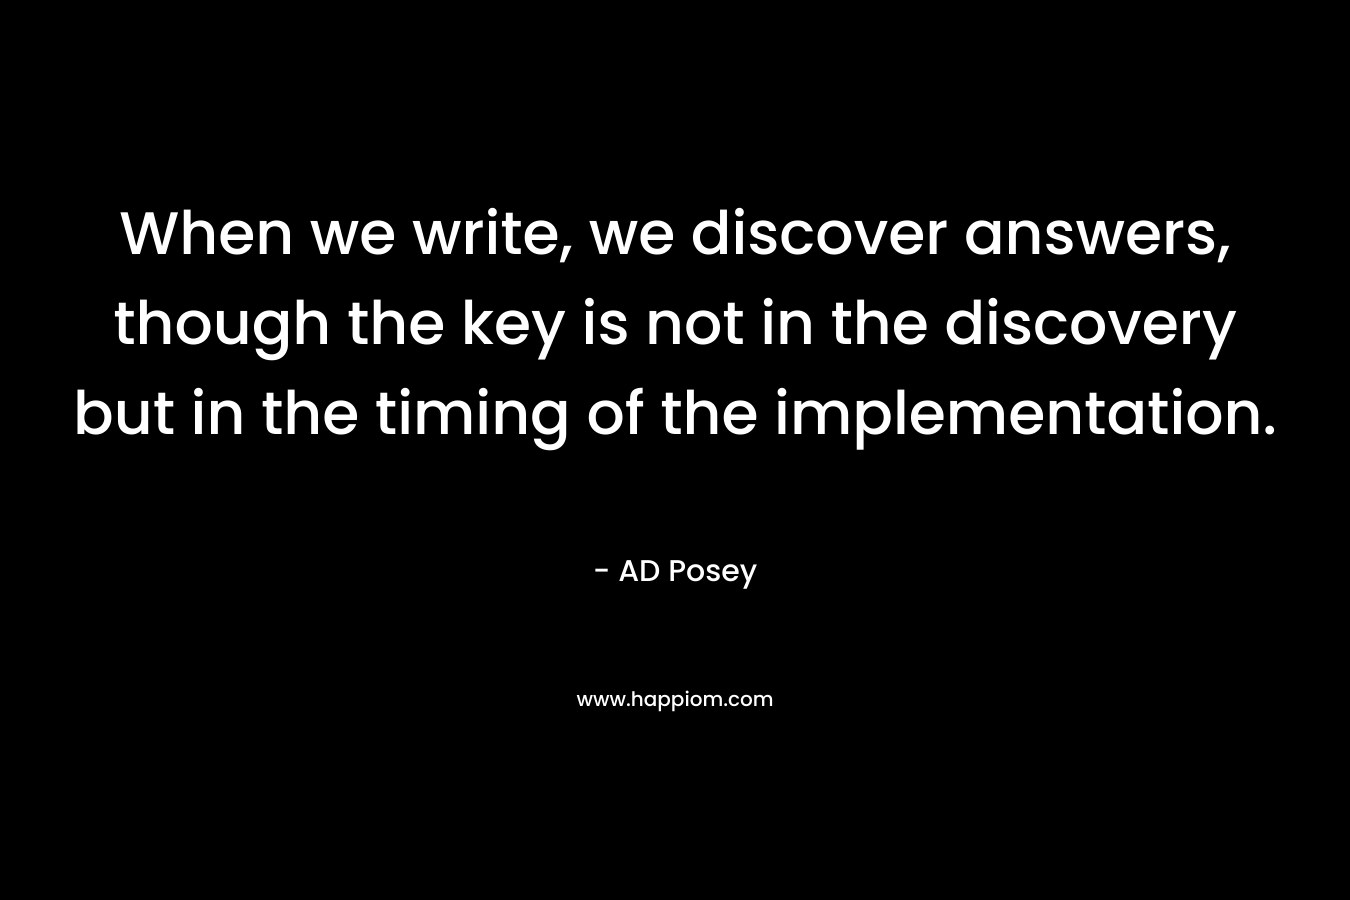 When we write, we discover answers, though the key is not in the discovery but in the timing of the implementation.